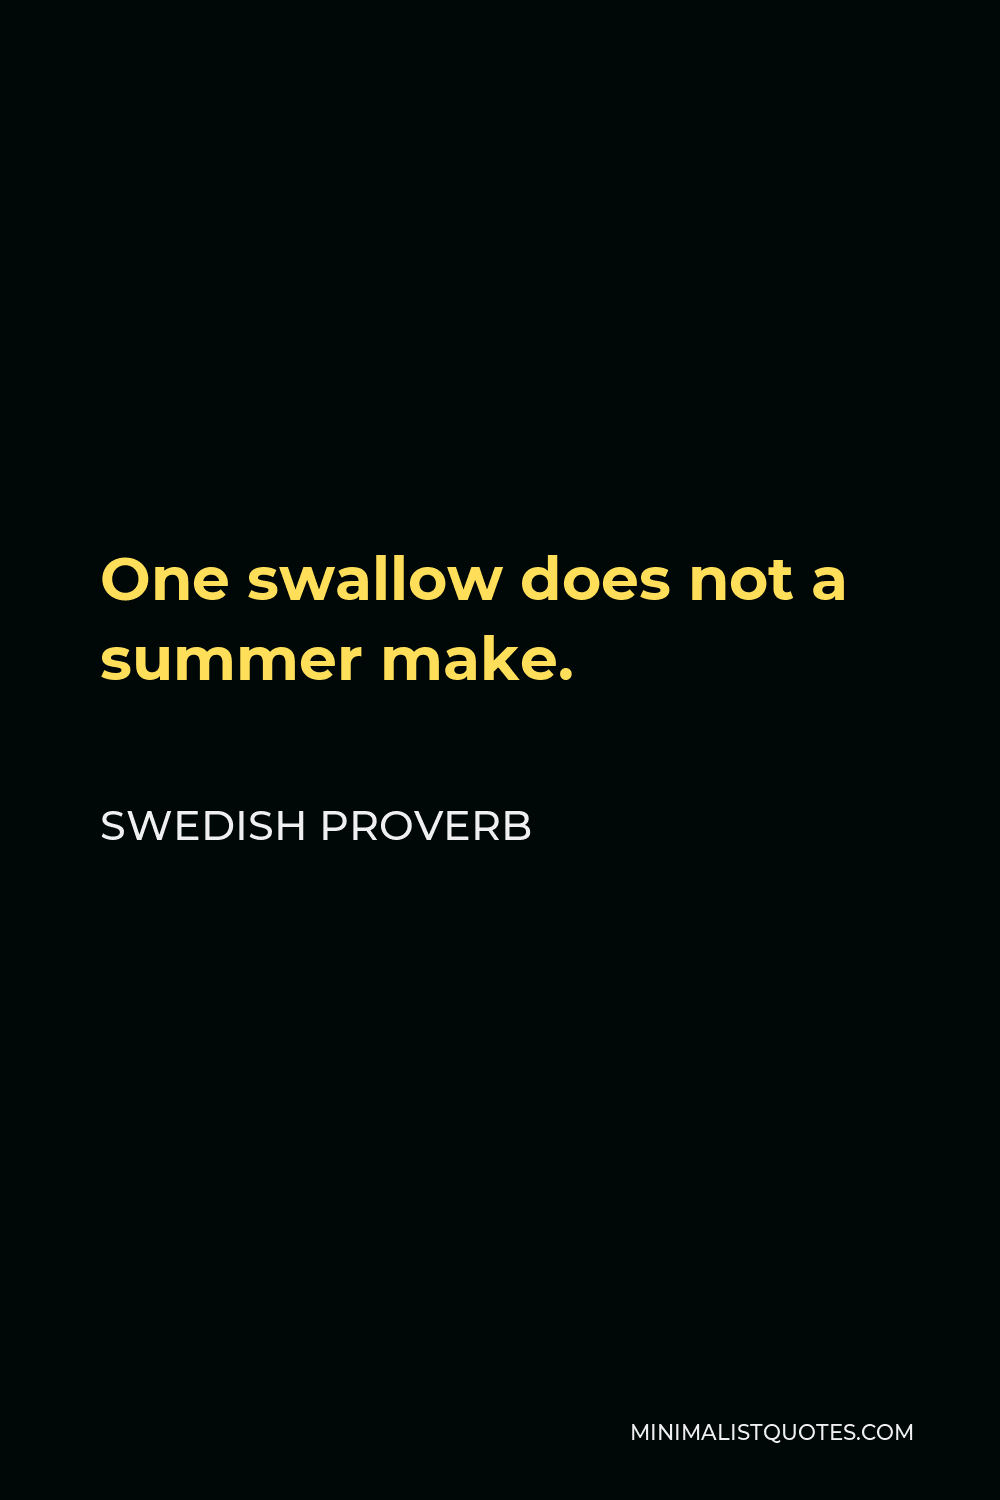 Swedish Proverb Quote - One swallow does not a summer make.